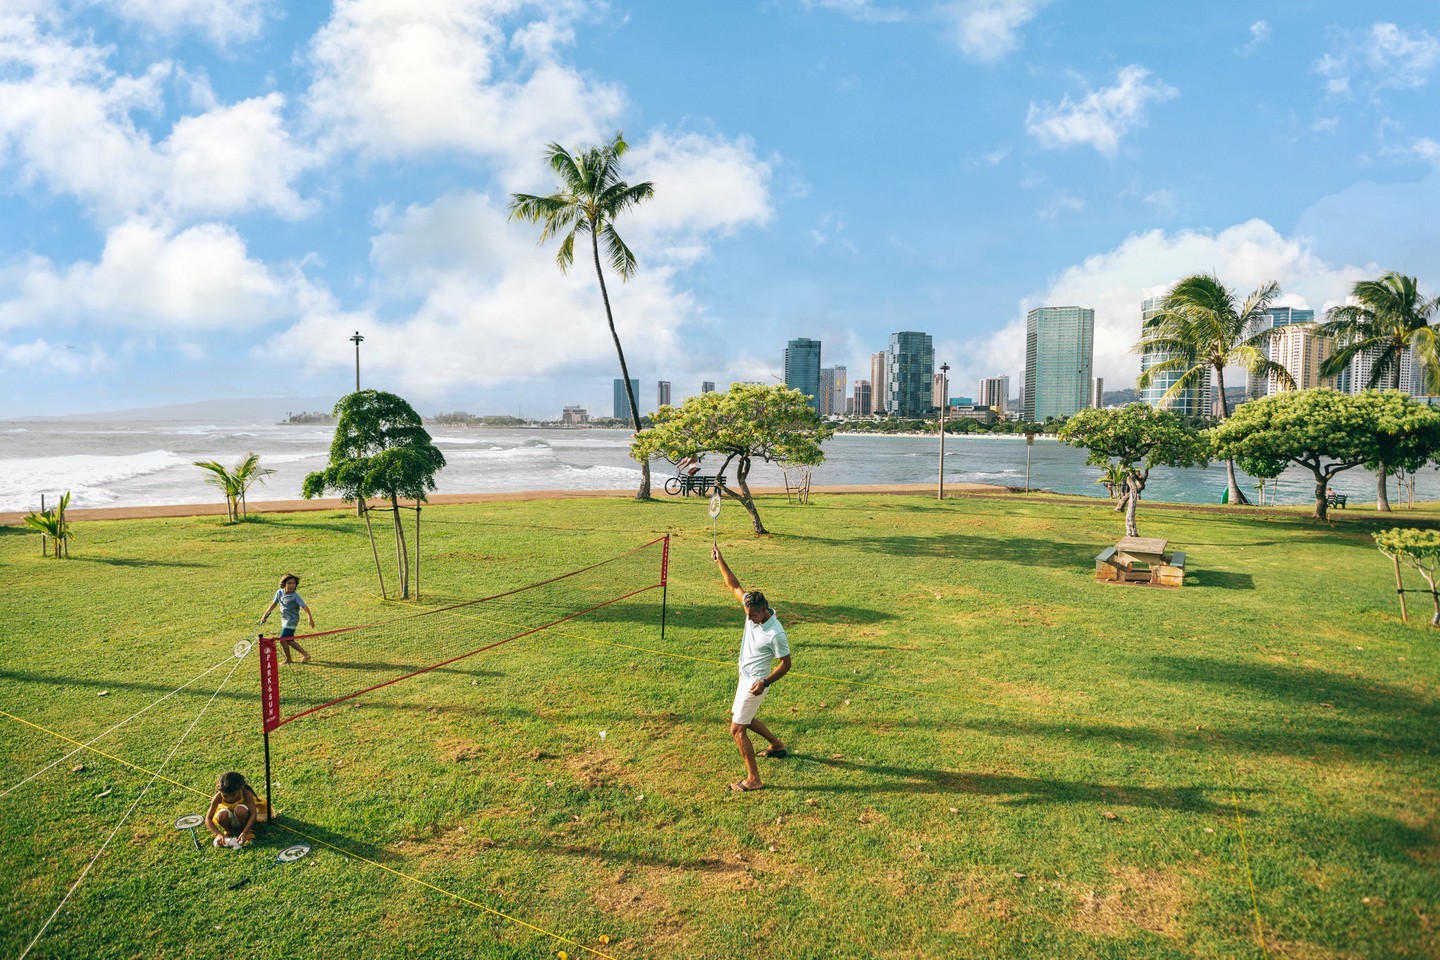 Ala Moana Beach Park offers so much when it comes to outdoor recreation. Surfing, running, tennis, beach volleyball, these are just a few of the activities to enjoy at the park – sometimes all in one day!